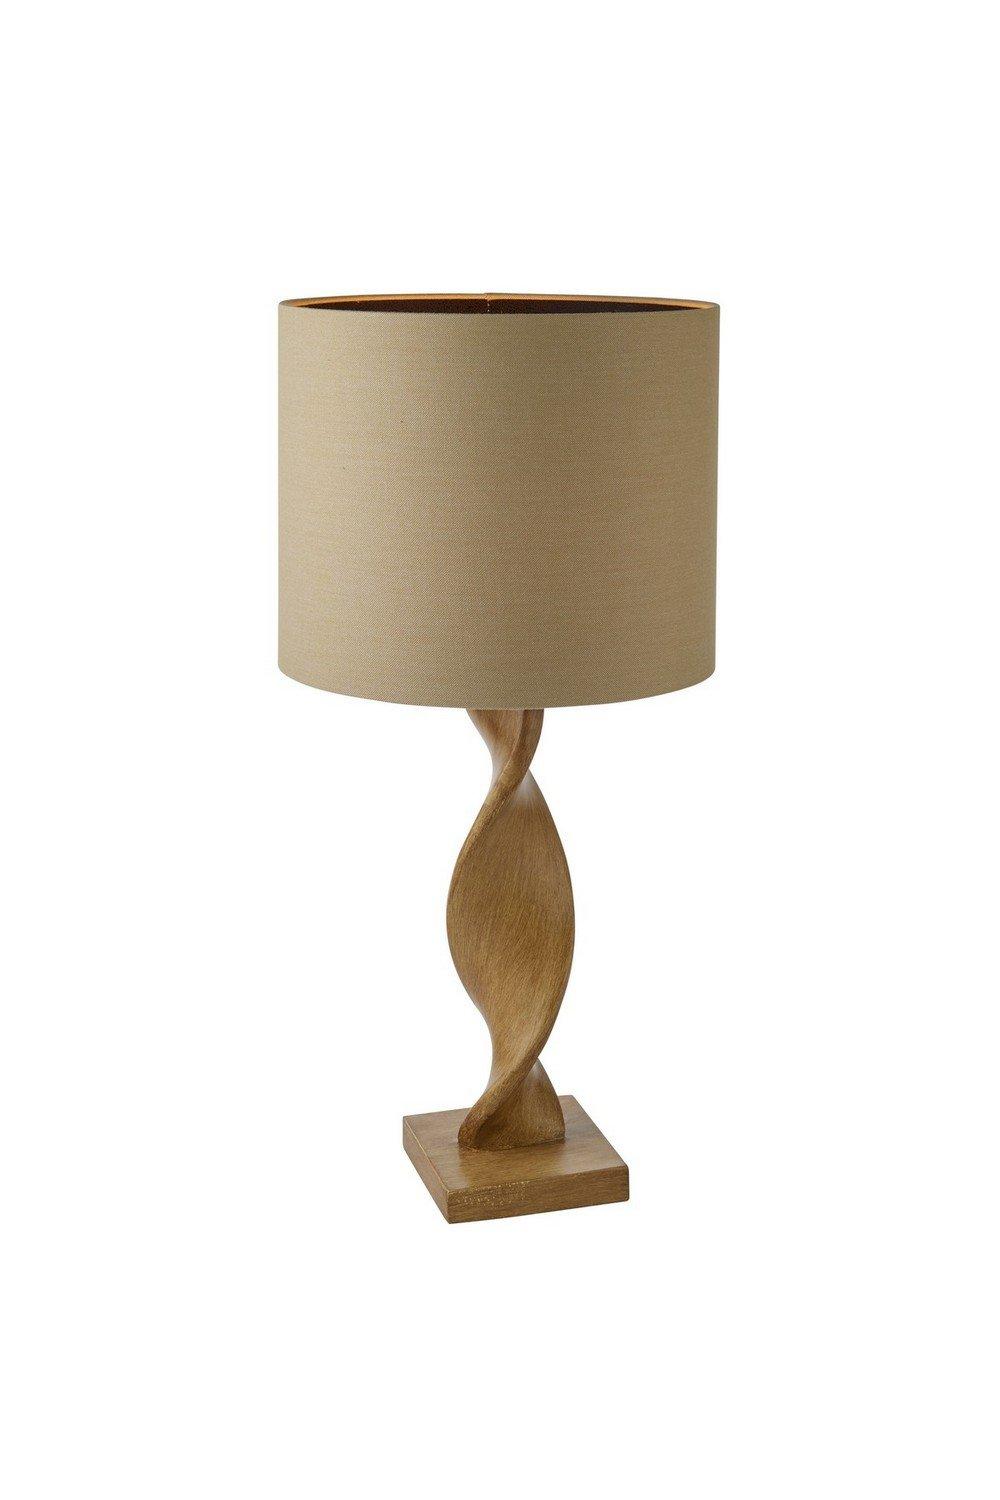 Abia Table Lamp Oak Effect Resin Natural Linen Shade